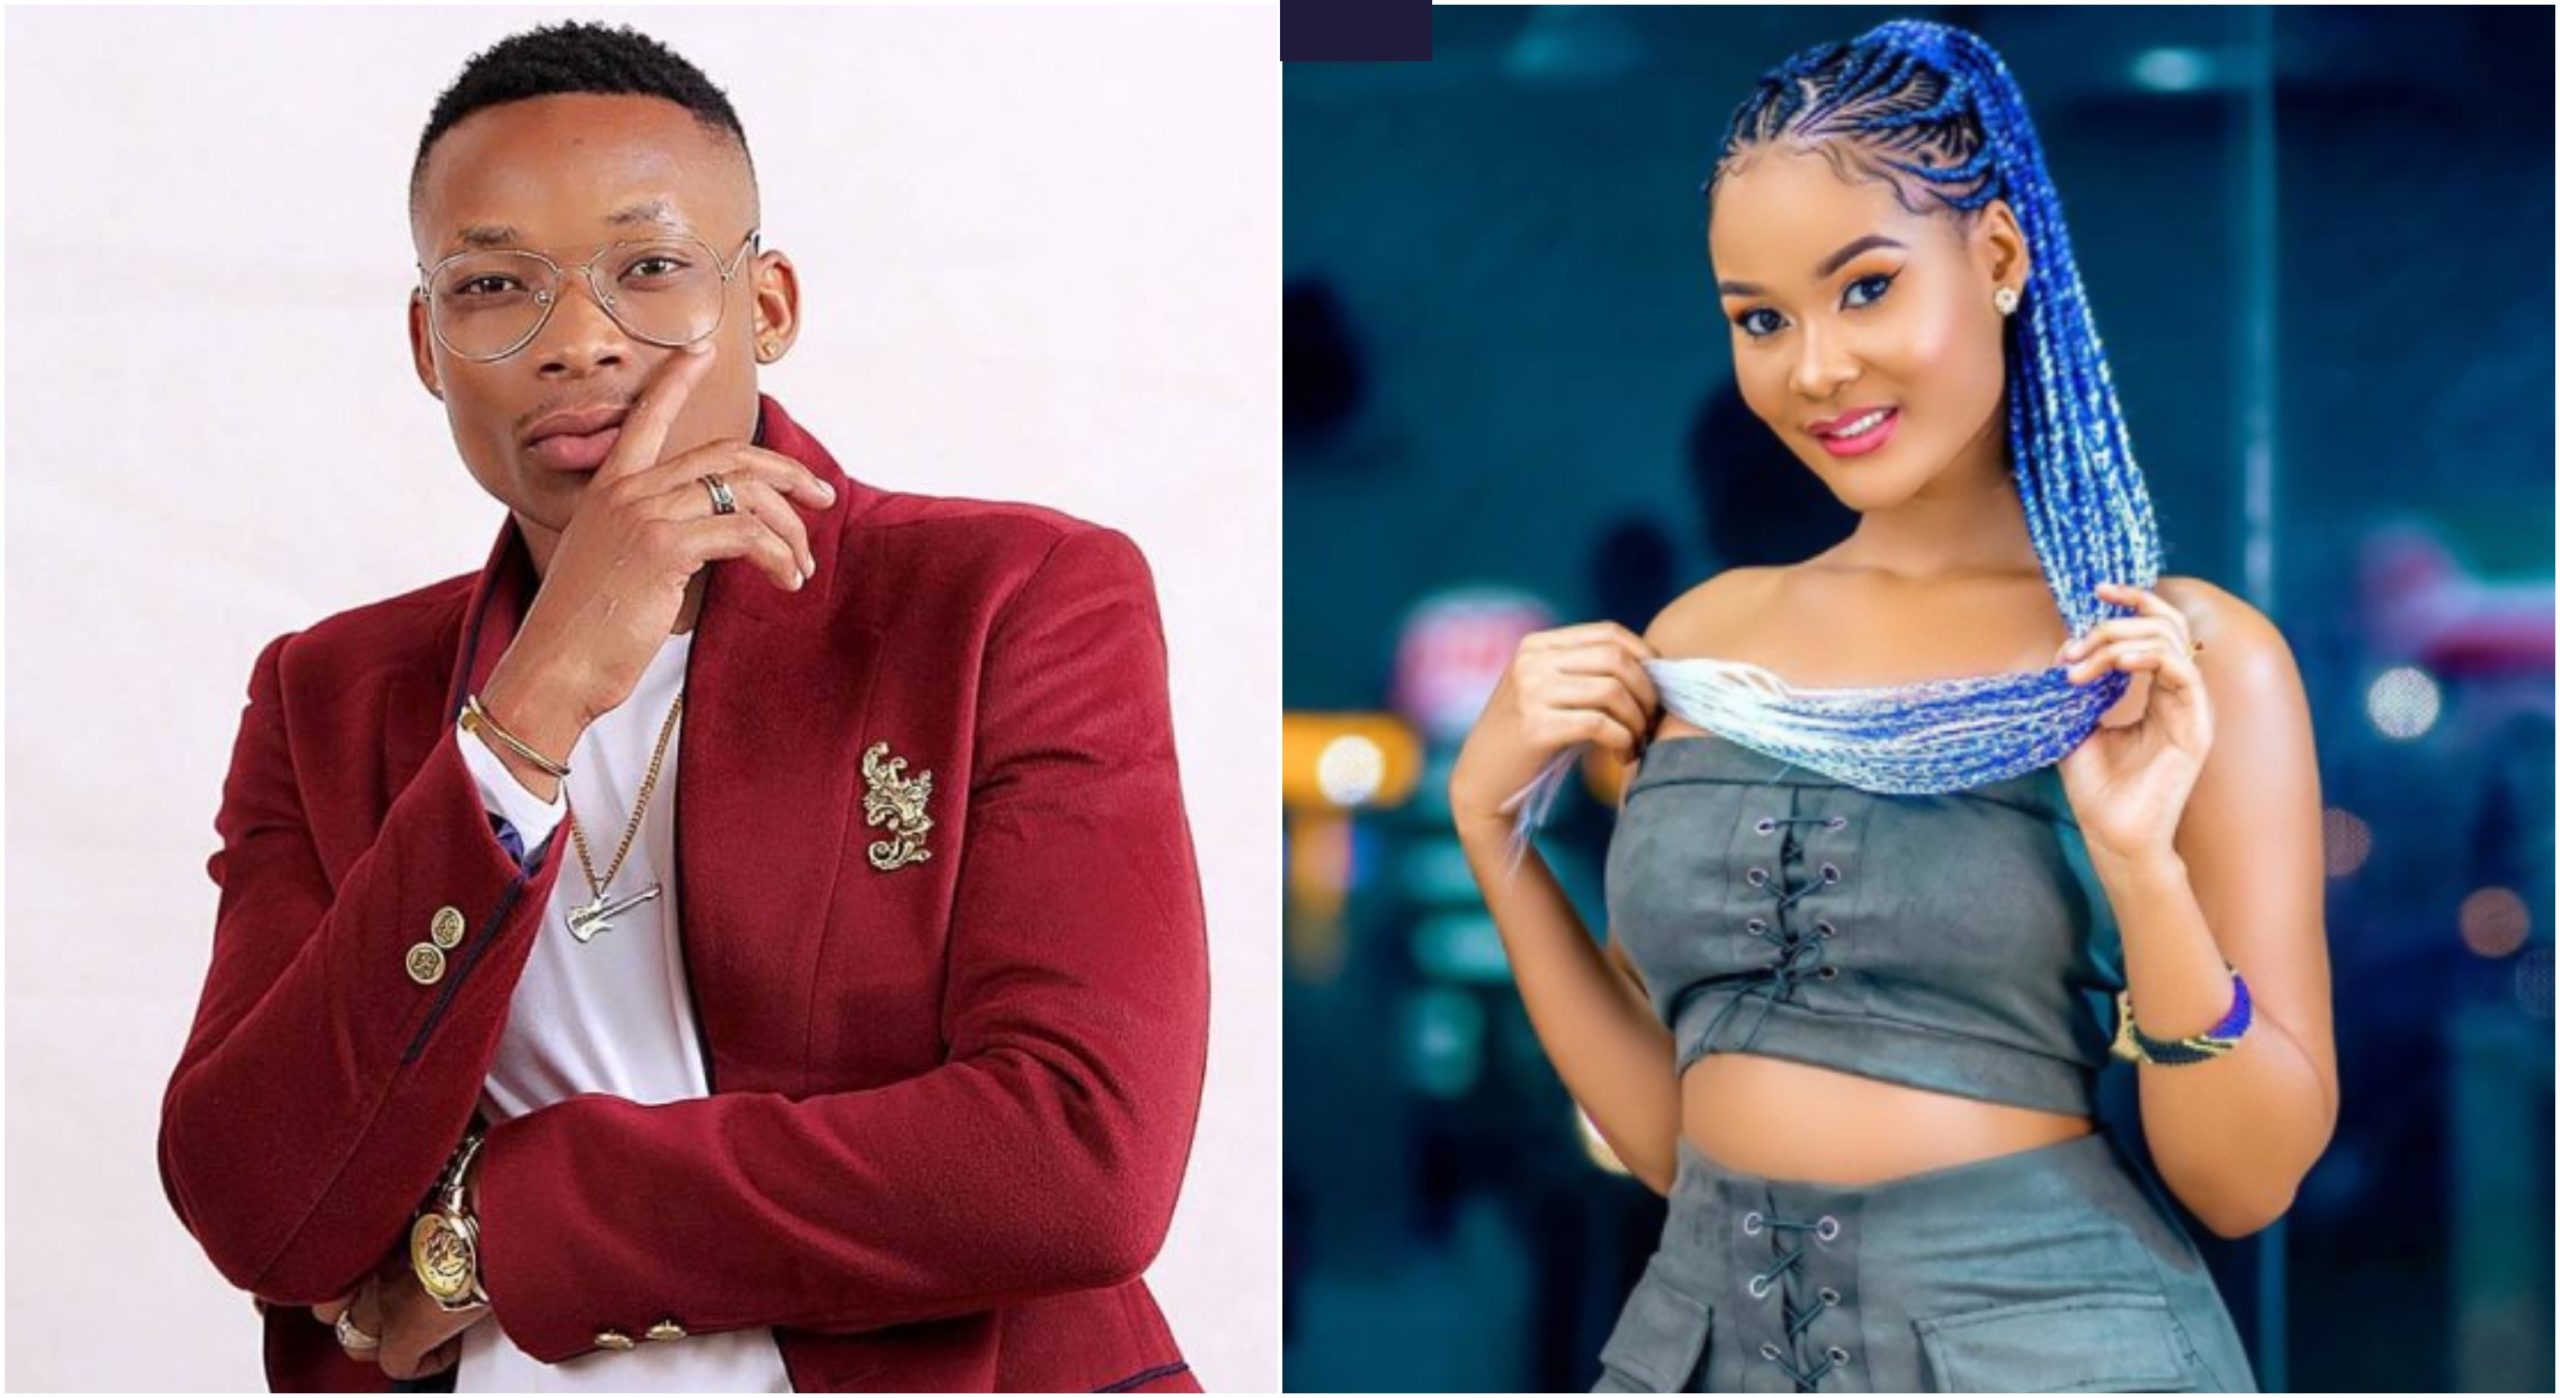 Intimate video of Hamisa Mobetto and Otile Brown raises eyebrows